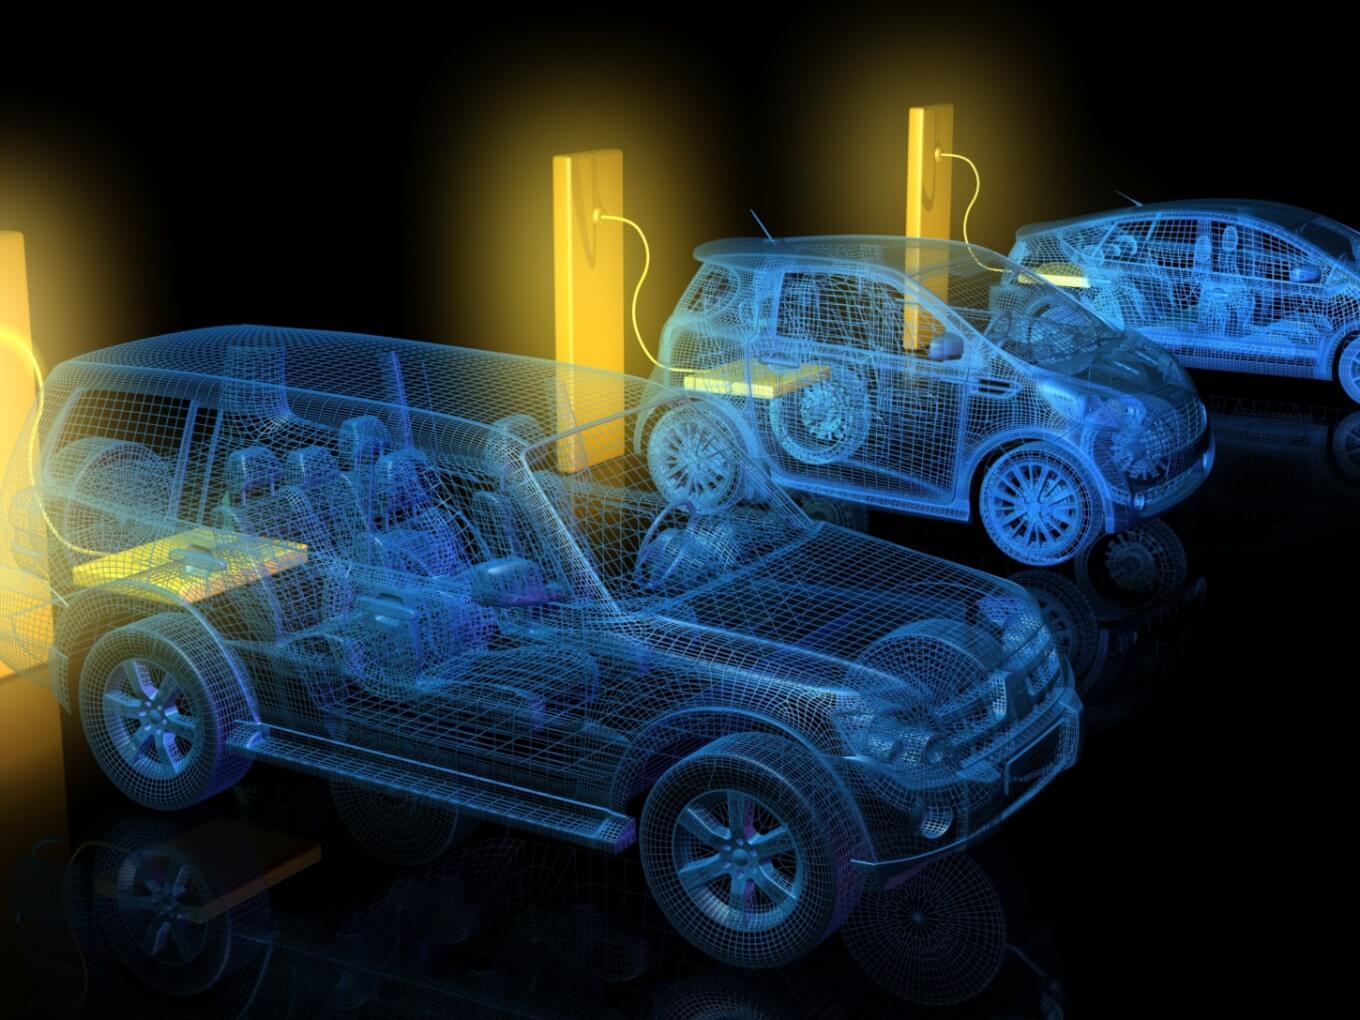 How Electric Technology Can Lead Future In The Next 5-10 Years